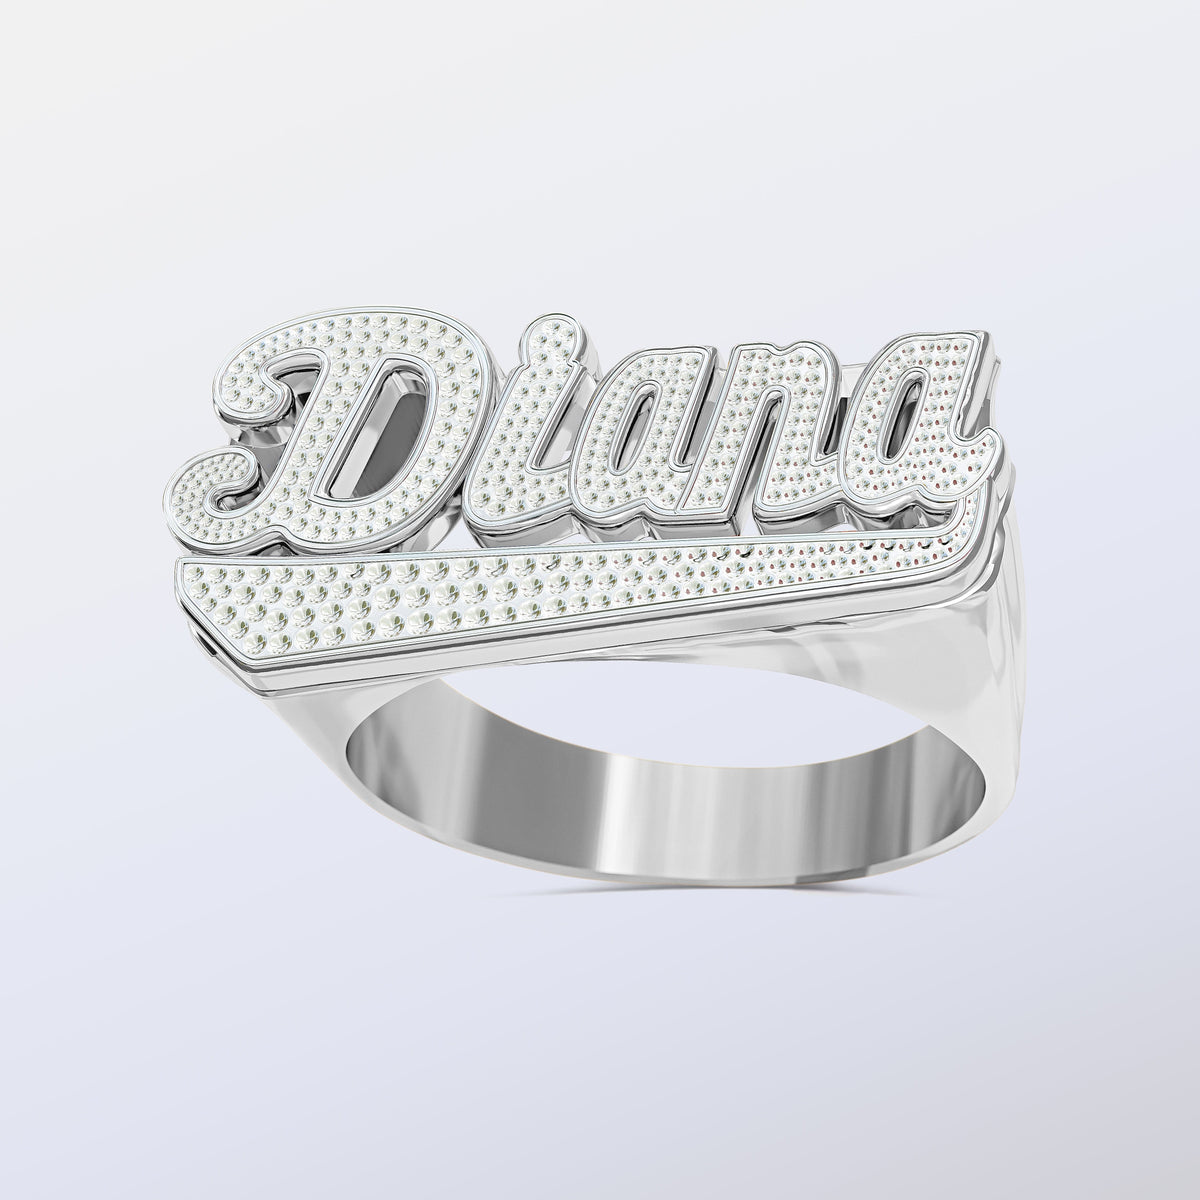 Personalized Name Ring w/ Beading